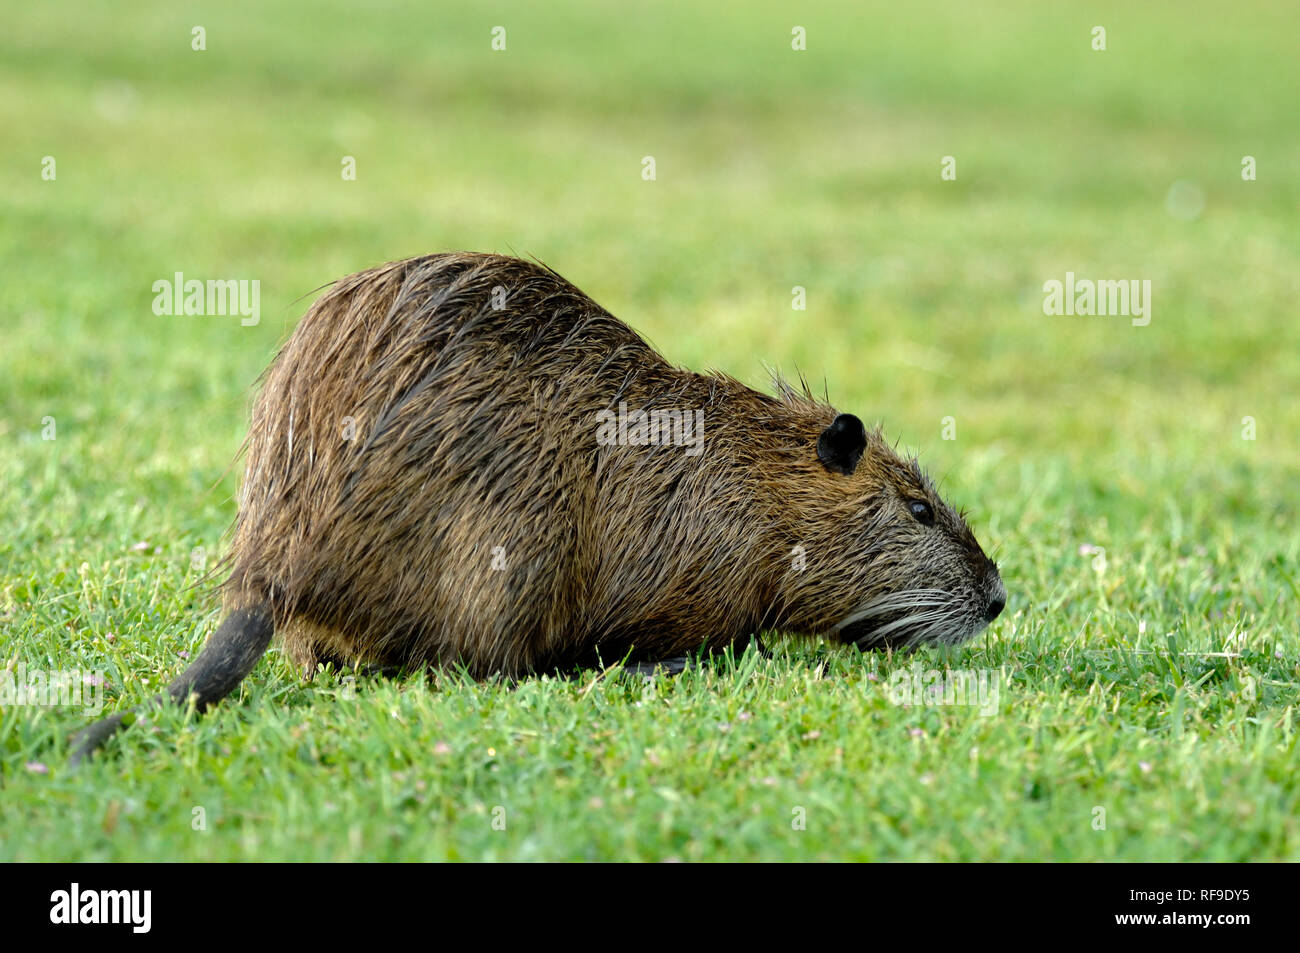 Coypu or Nutria Rodent, Myocastor coypus, Grazing, Eating or Feeding in the Camargue Provence France Stock Photo